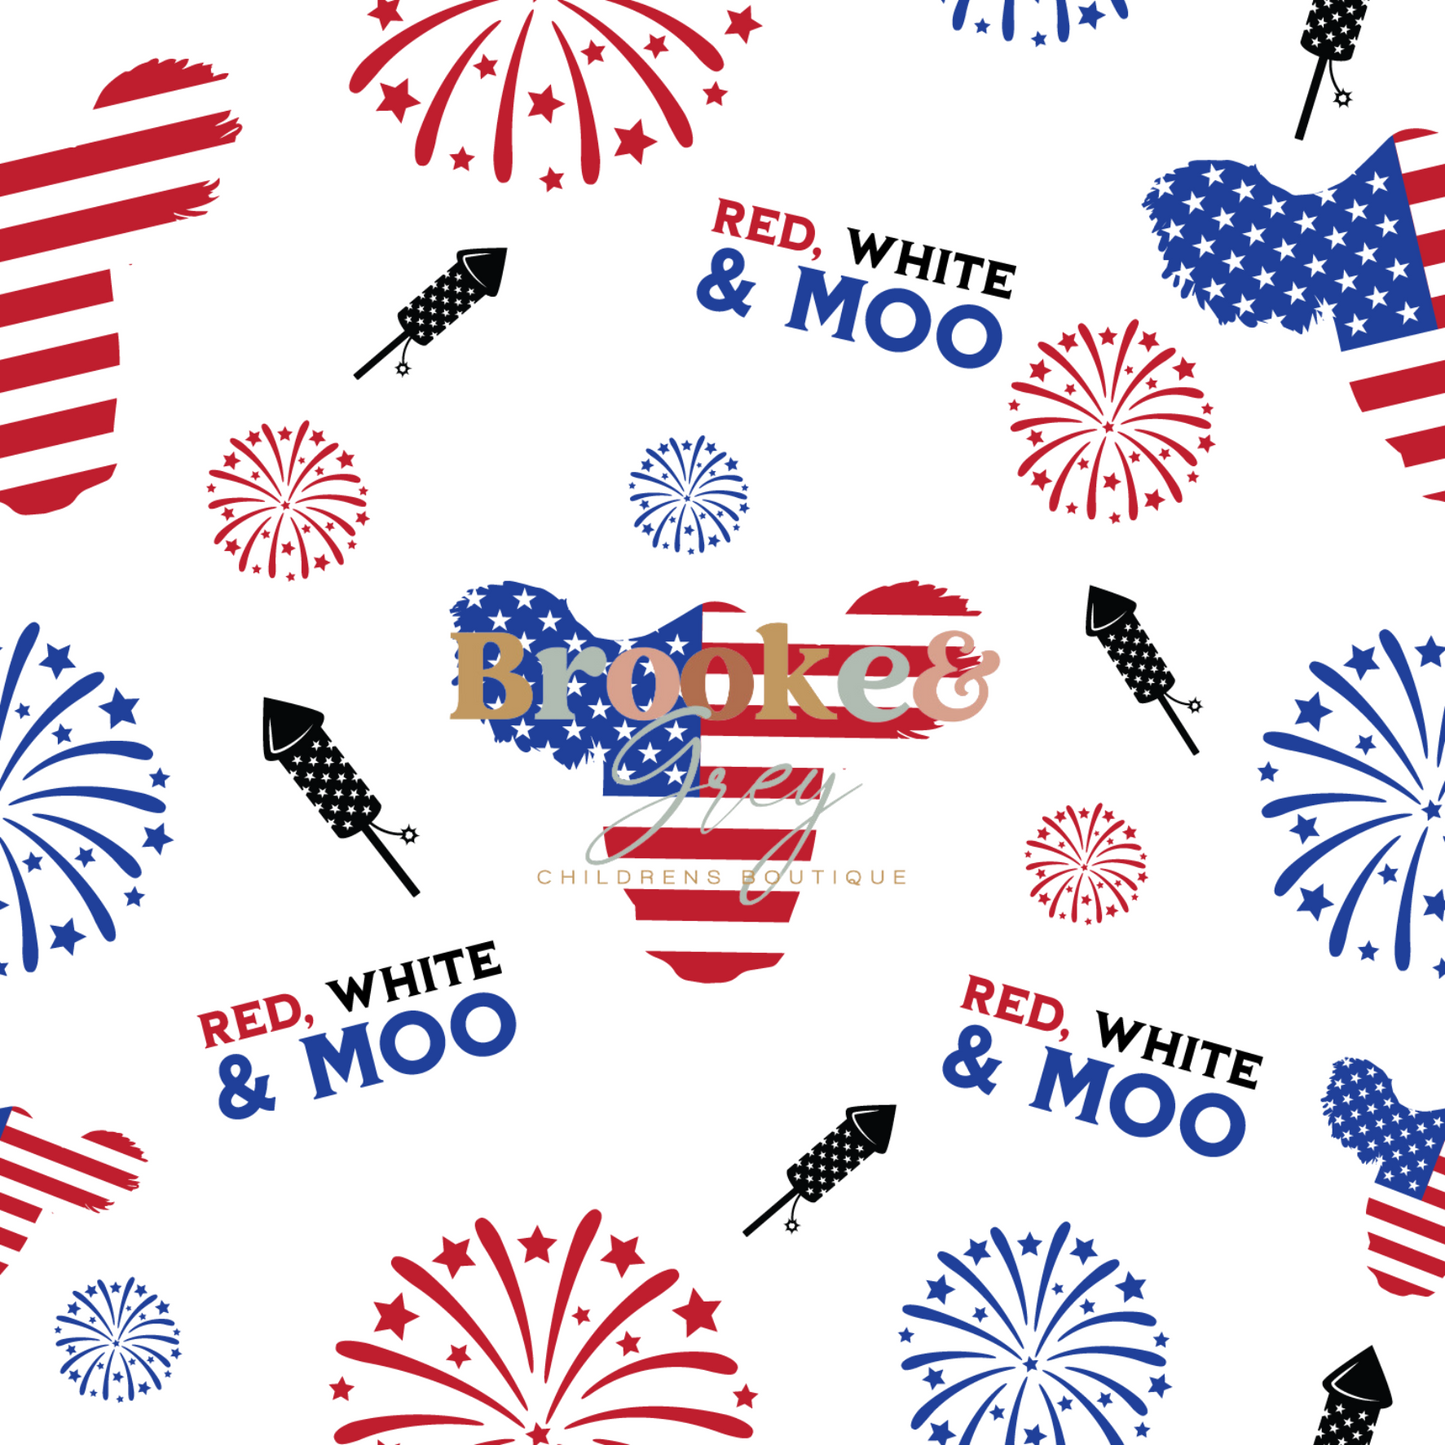 Red white & moo blanket - PREORDER